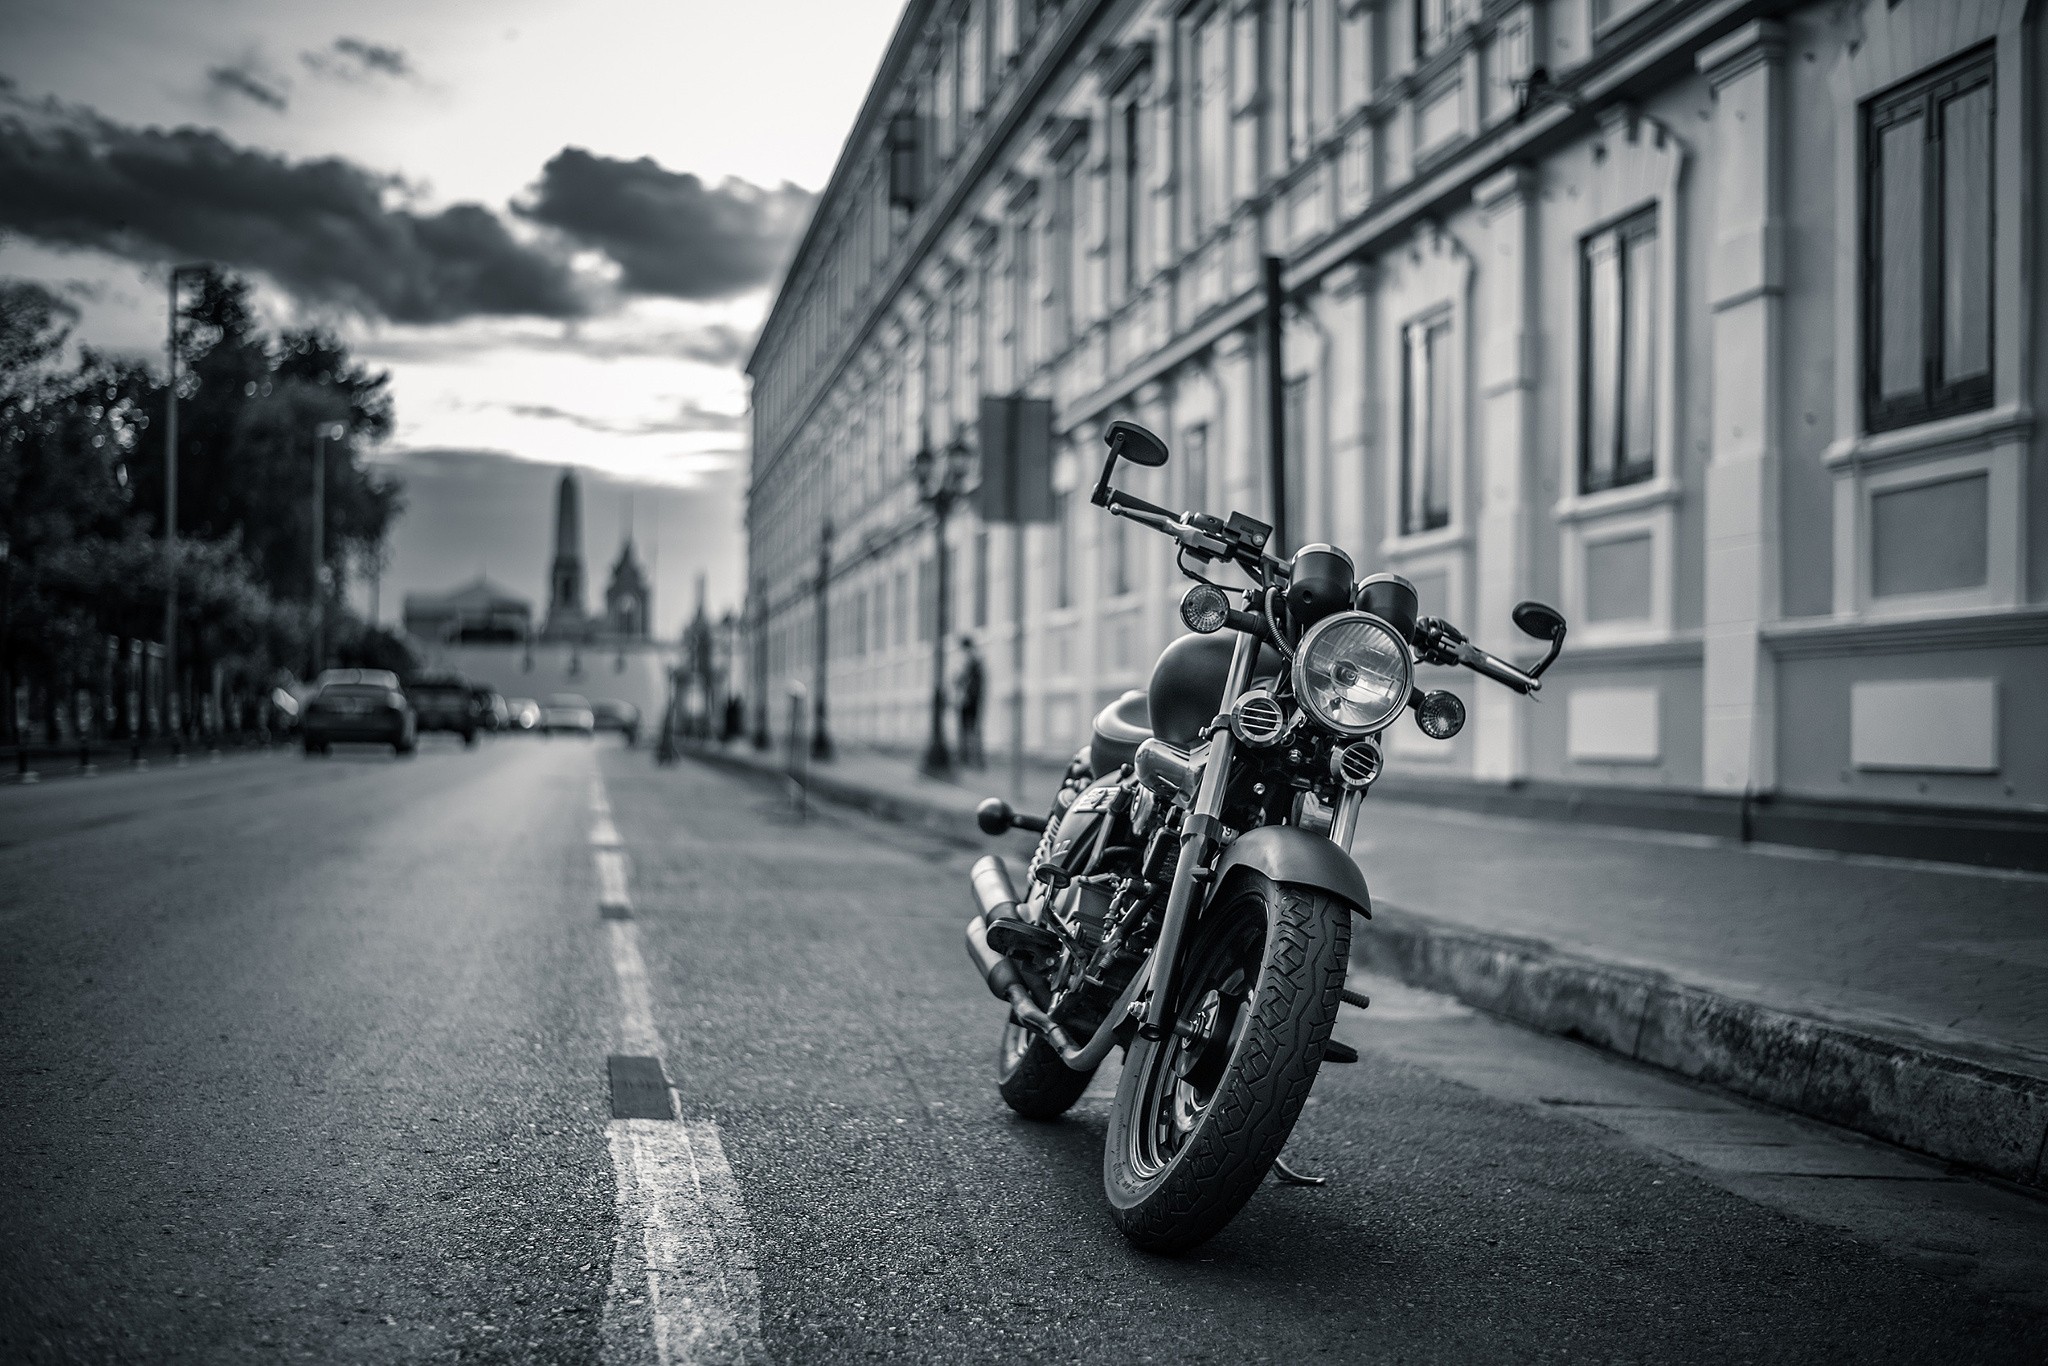 General 2048x1366 Harley-Davidson modified monochrome motorcycle vehicle street city urban American motorcycles